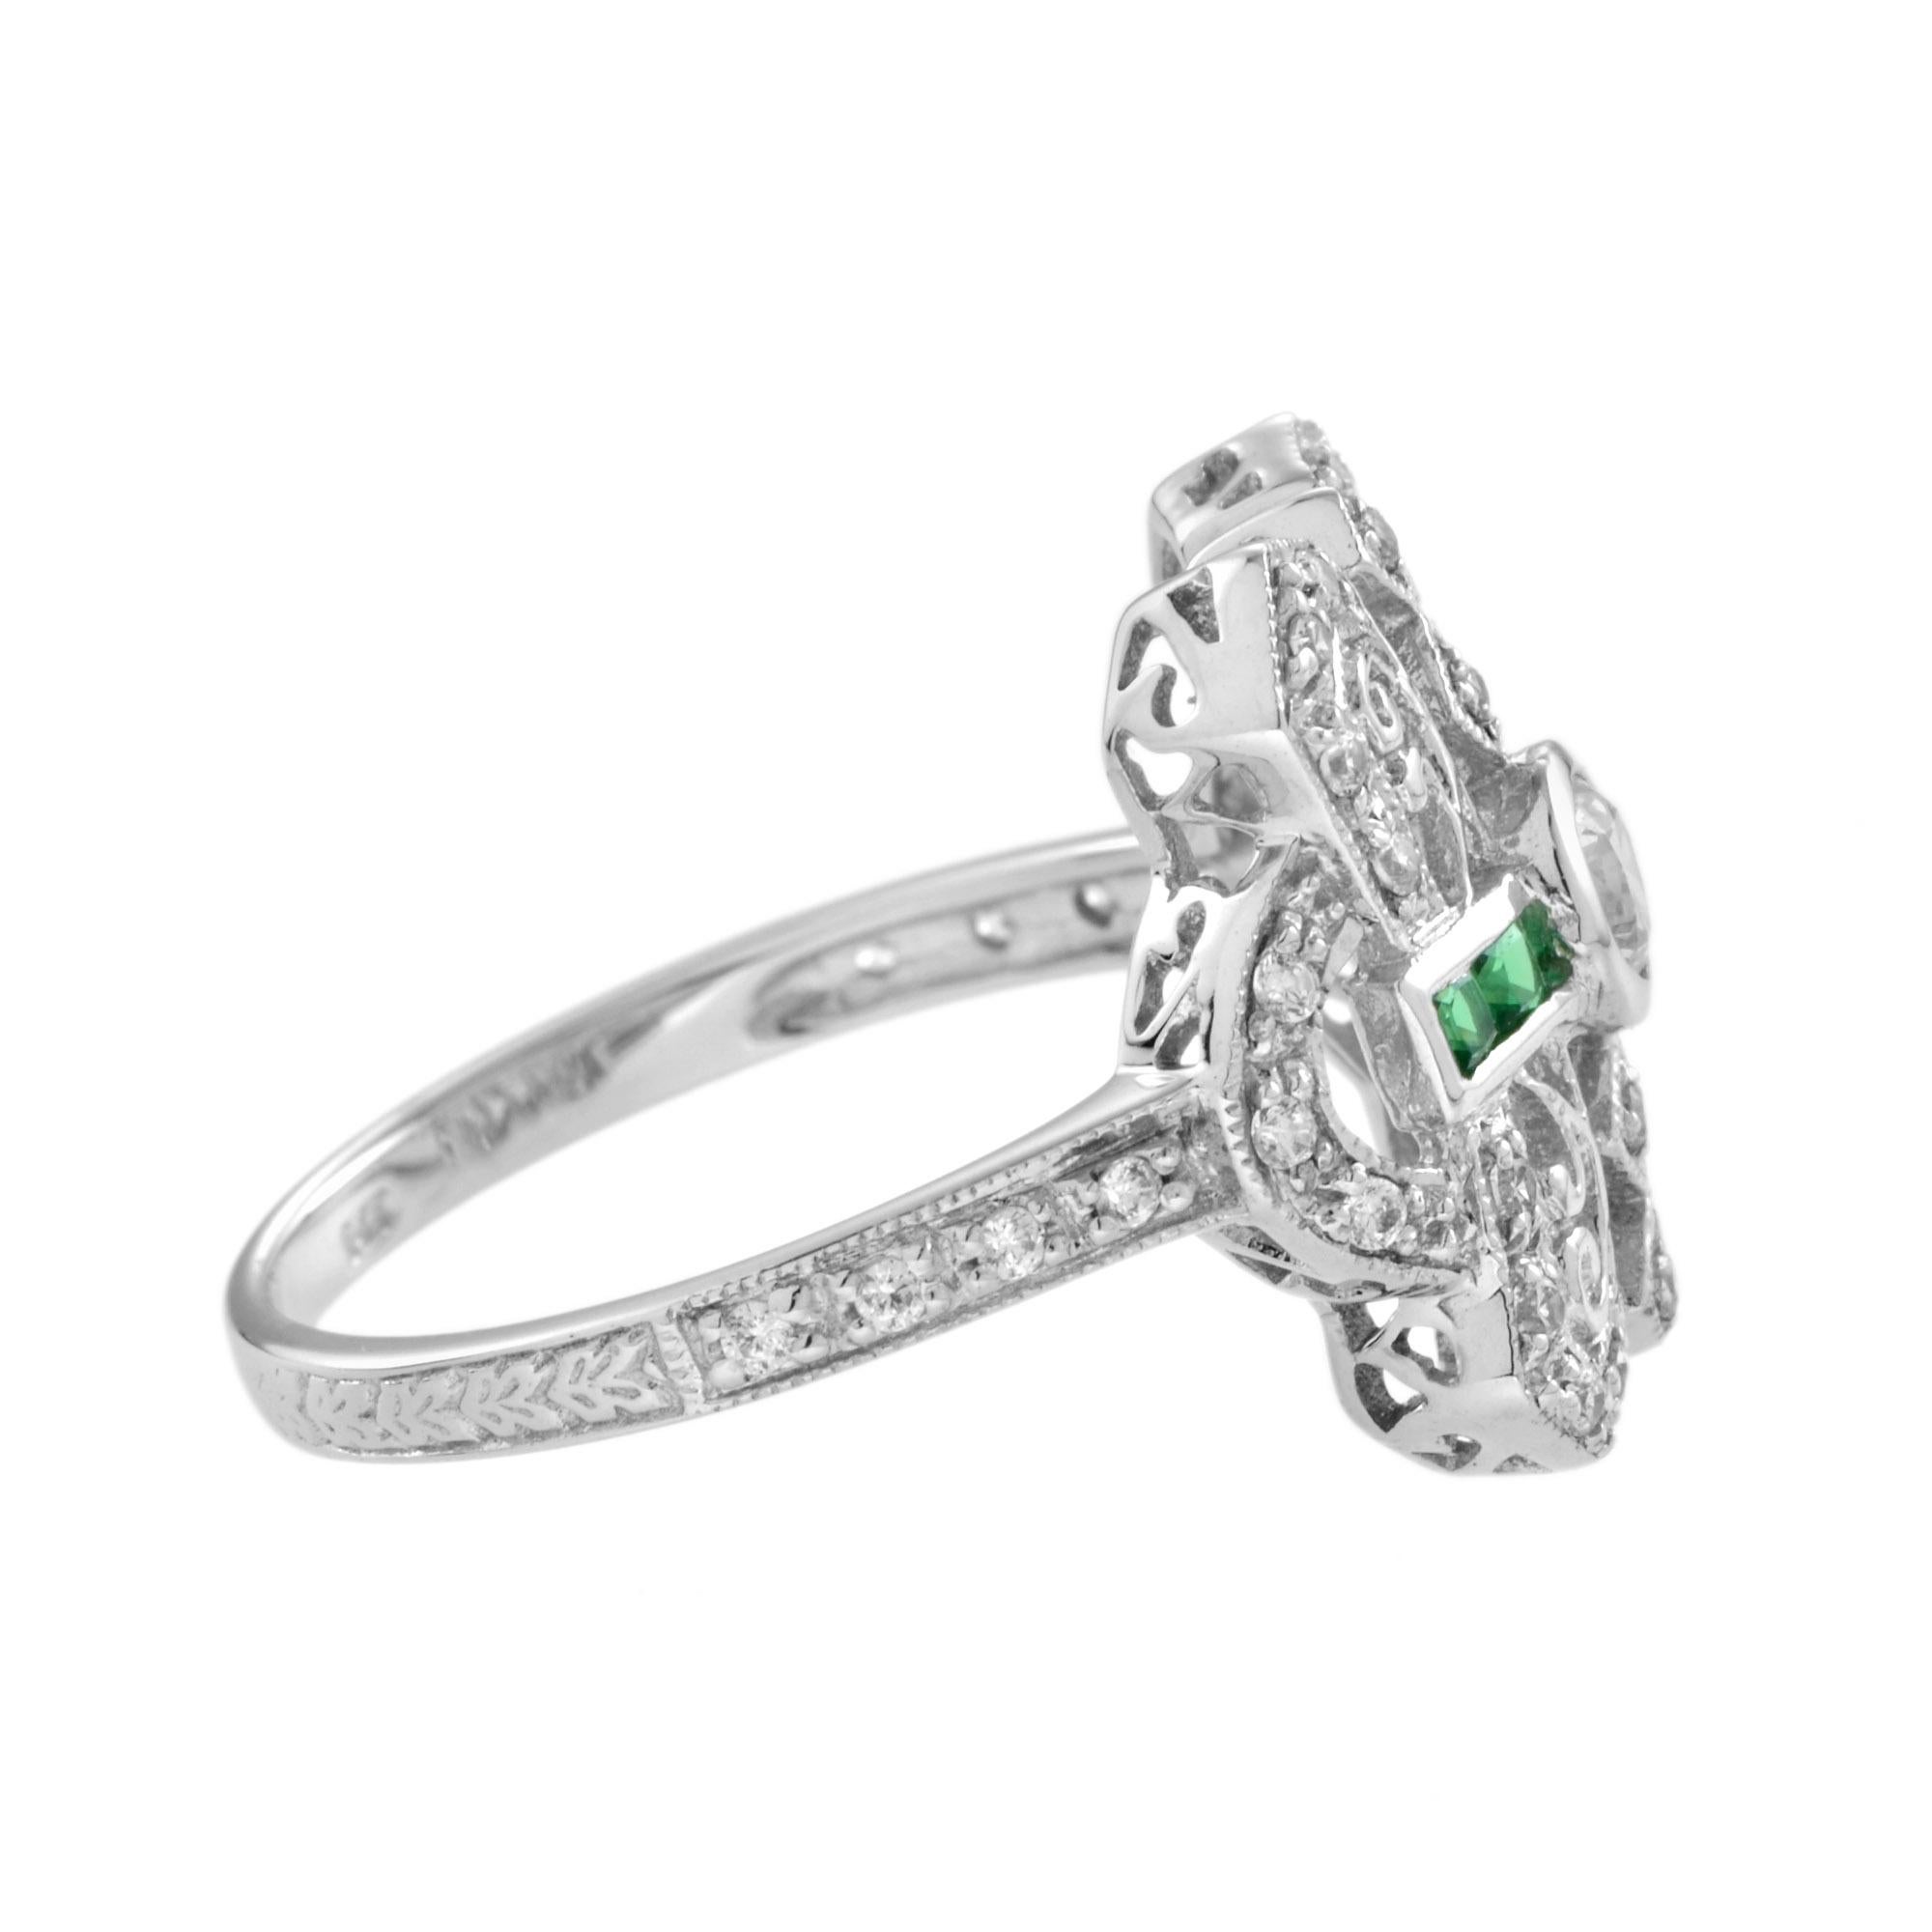 For Sale:  Diamond and Emerald Art Deco Style Filigree Ring in 14K White Gold 3